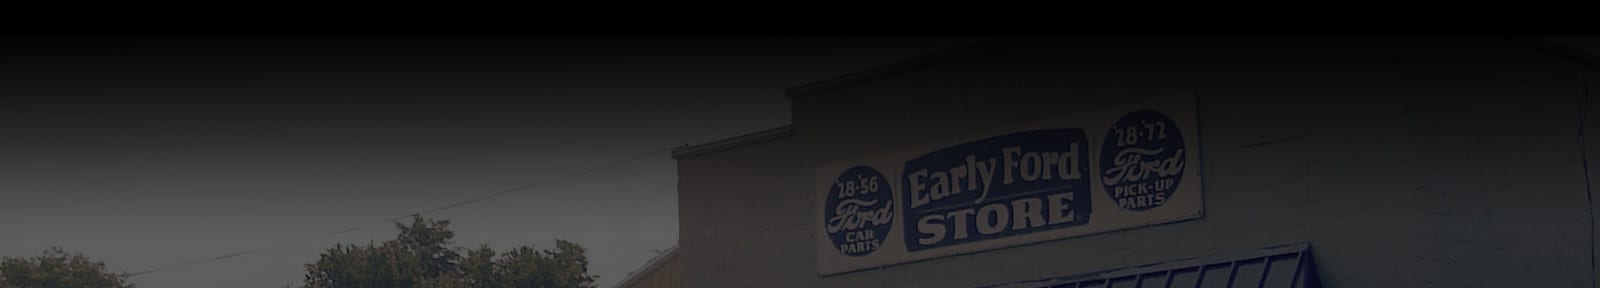 SHOP - Midwest Early Ford Parts for Vintage Cars and Trucks